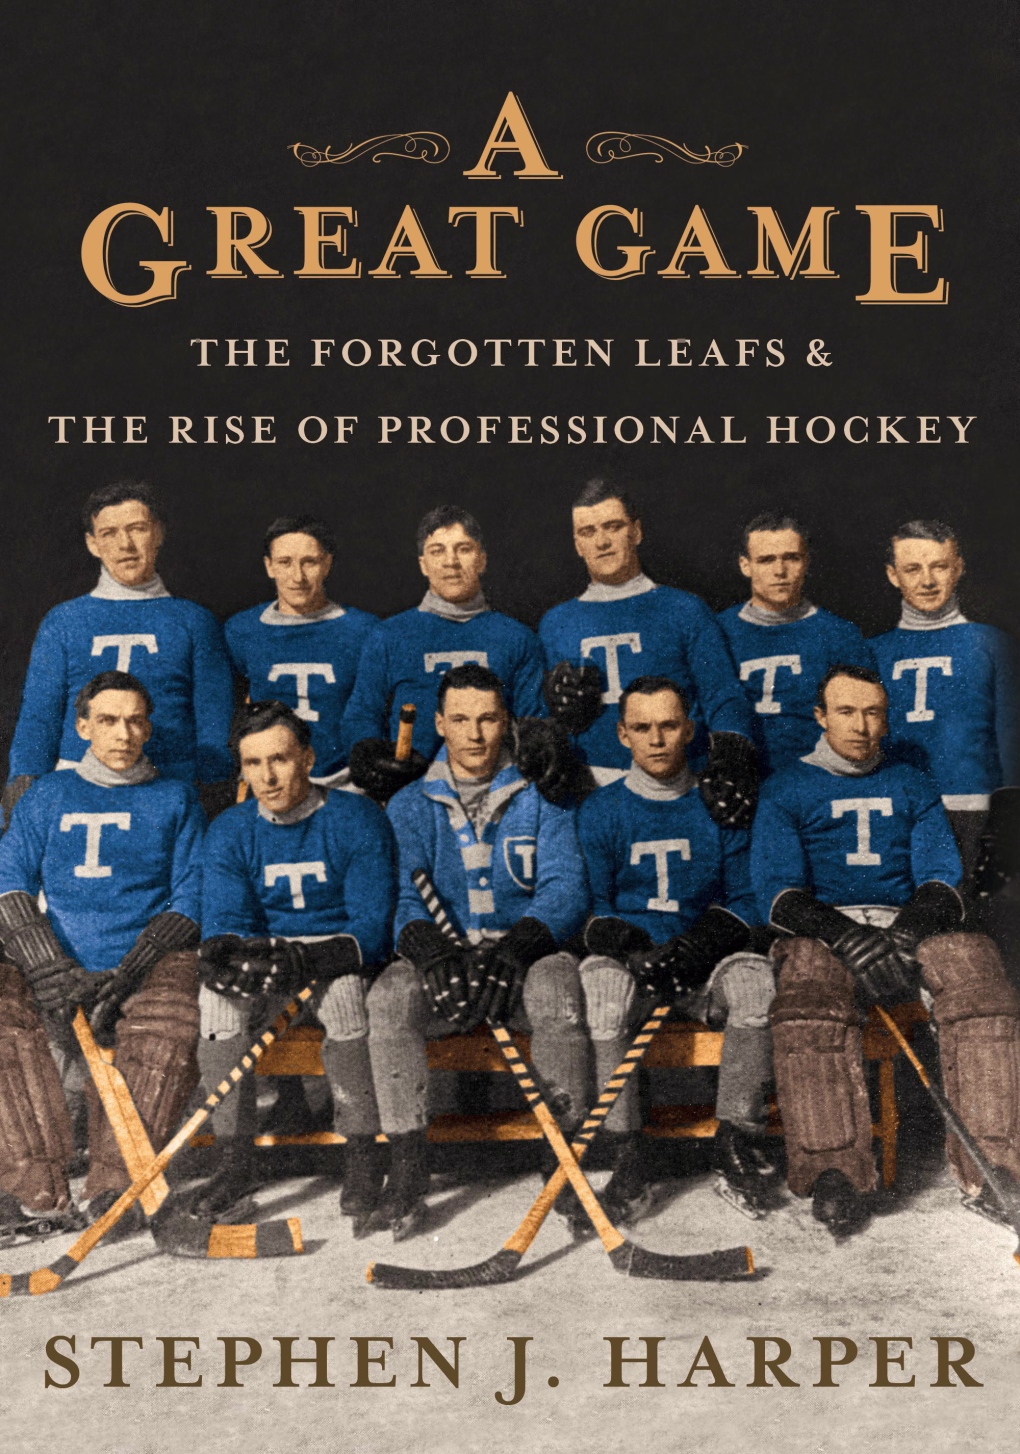 The Prime Minister's book on the history of hockey